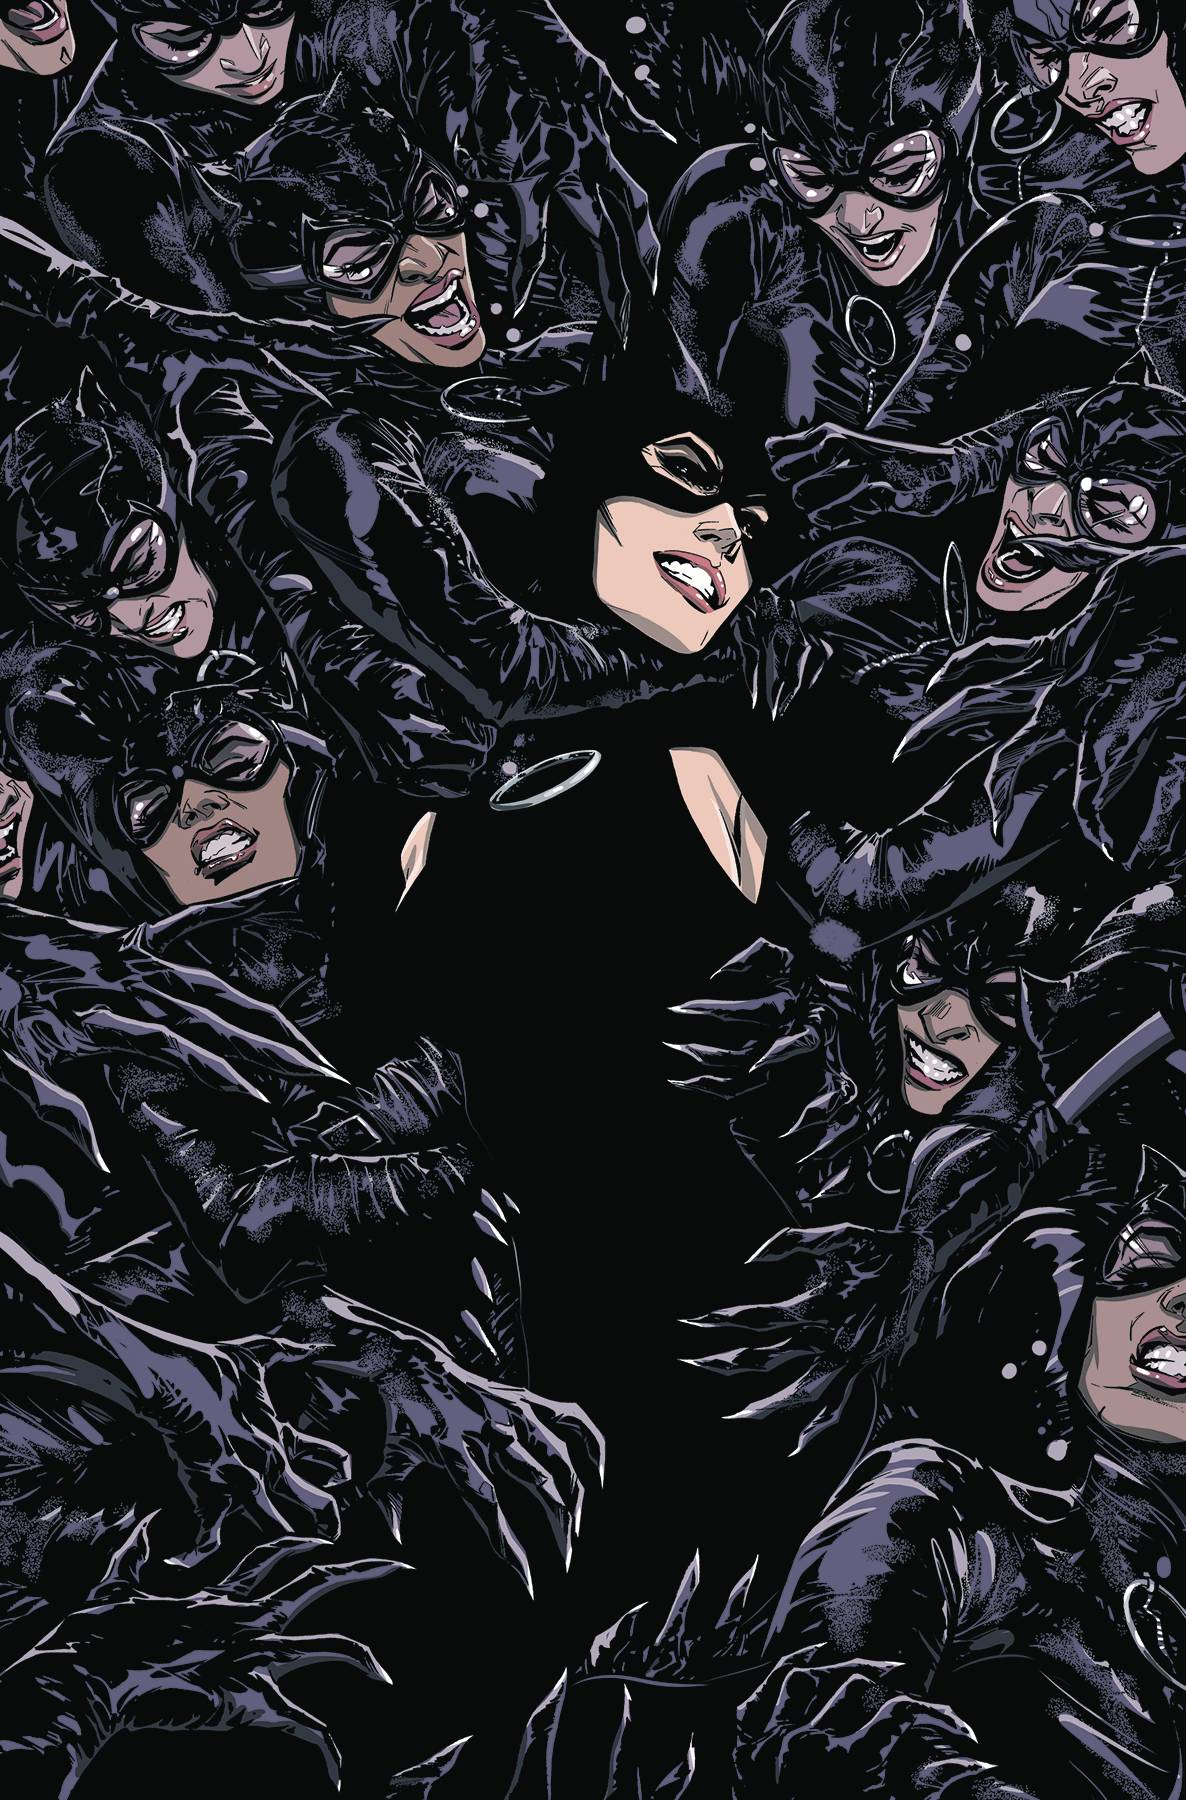 CATWOMAN #2 FOC 07/09 RELEASE DATE 08/01